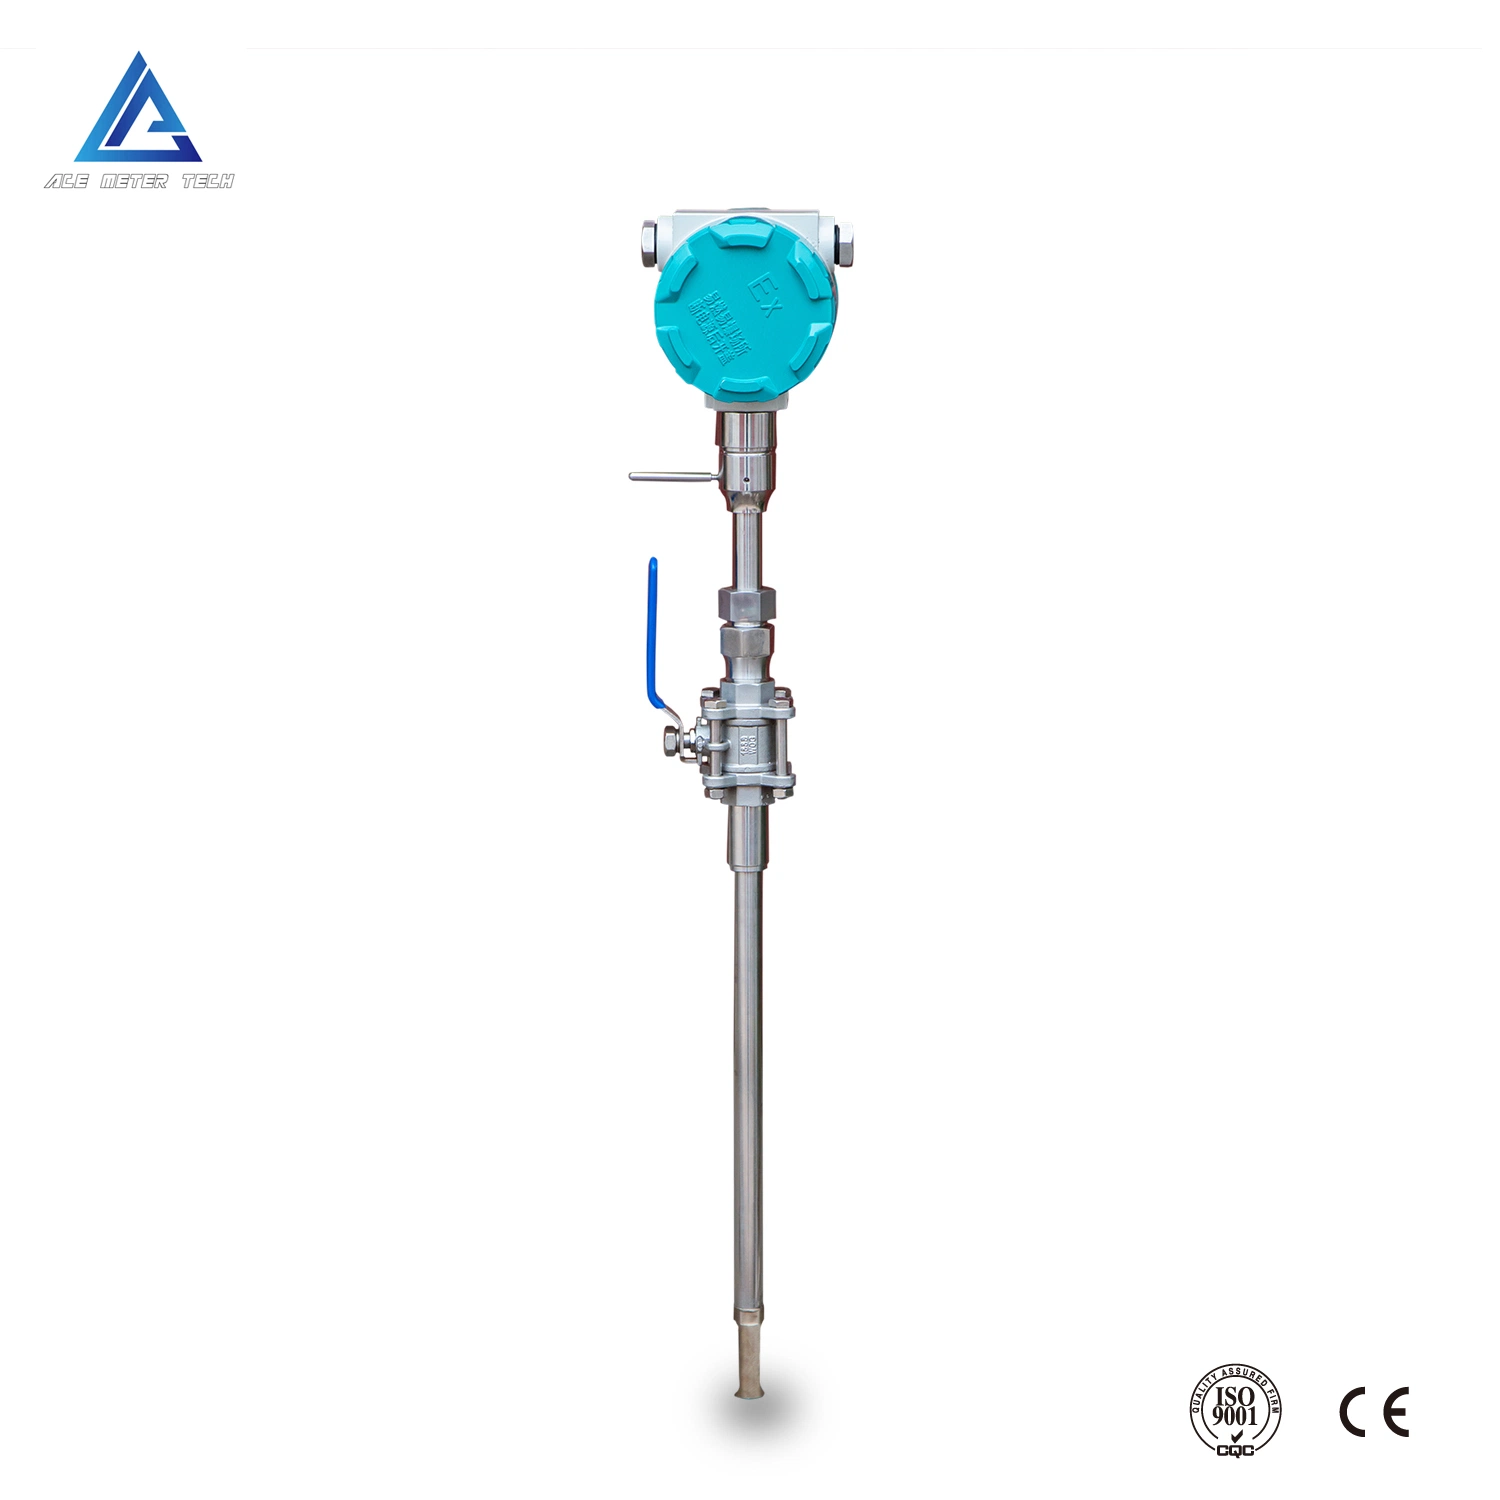 High Pressure Rating Thermal Gas Flowmeter Gas Mass Flow Meter for Compress Air